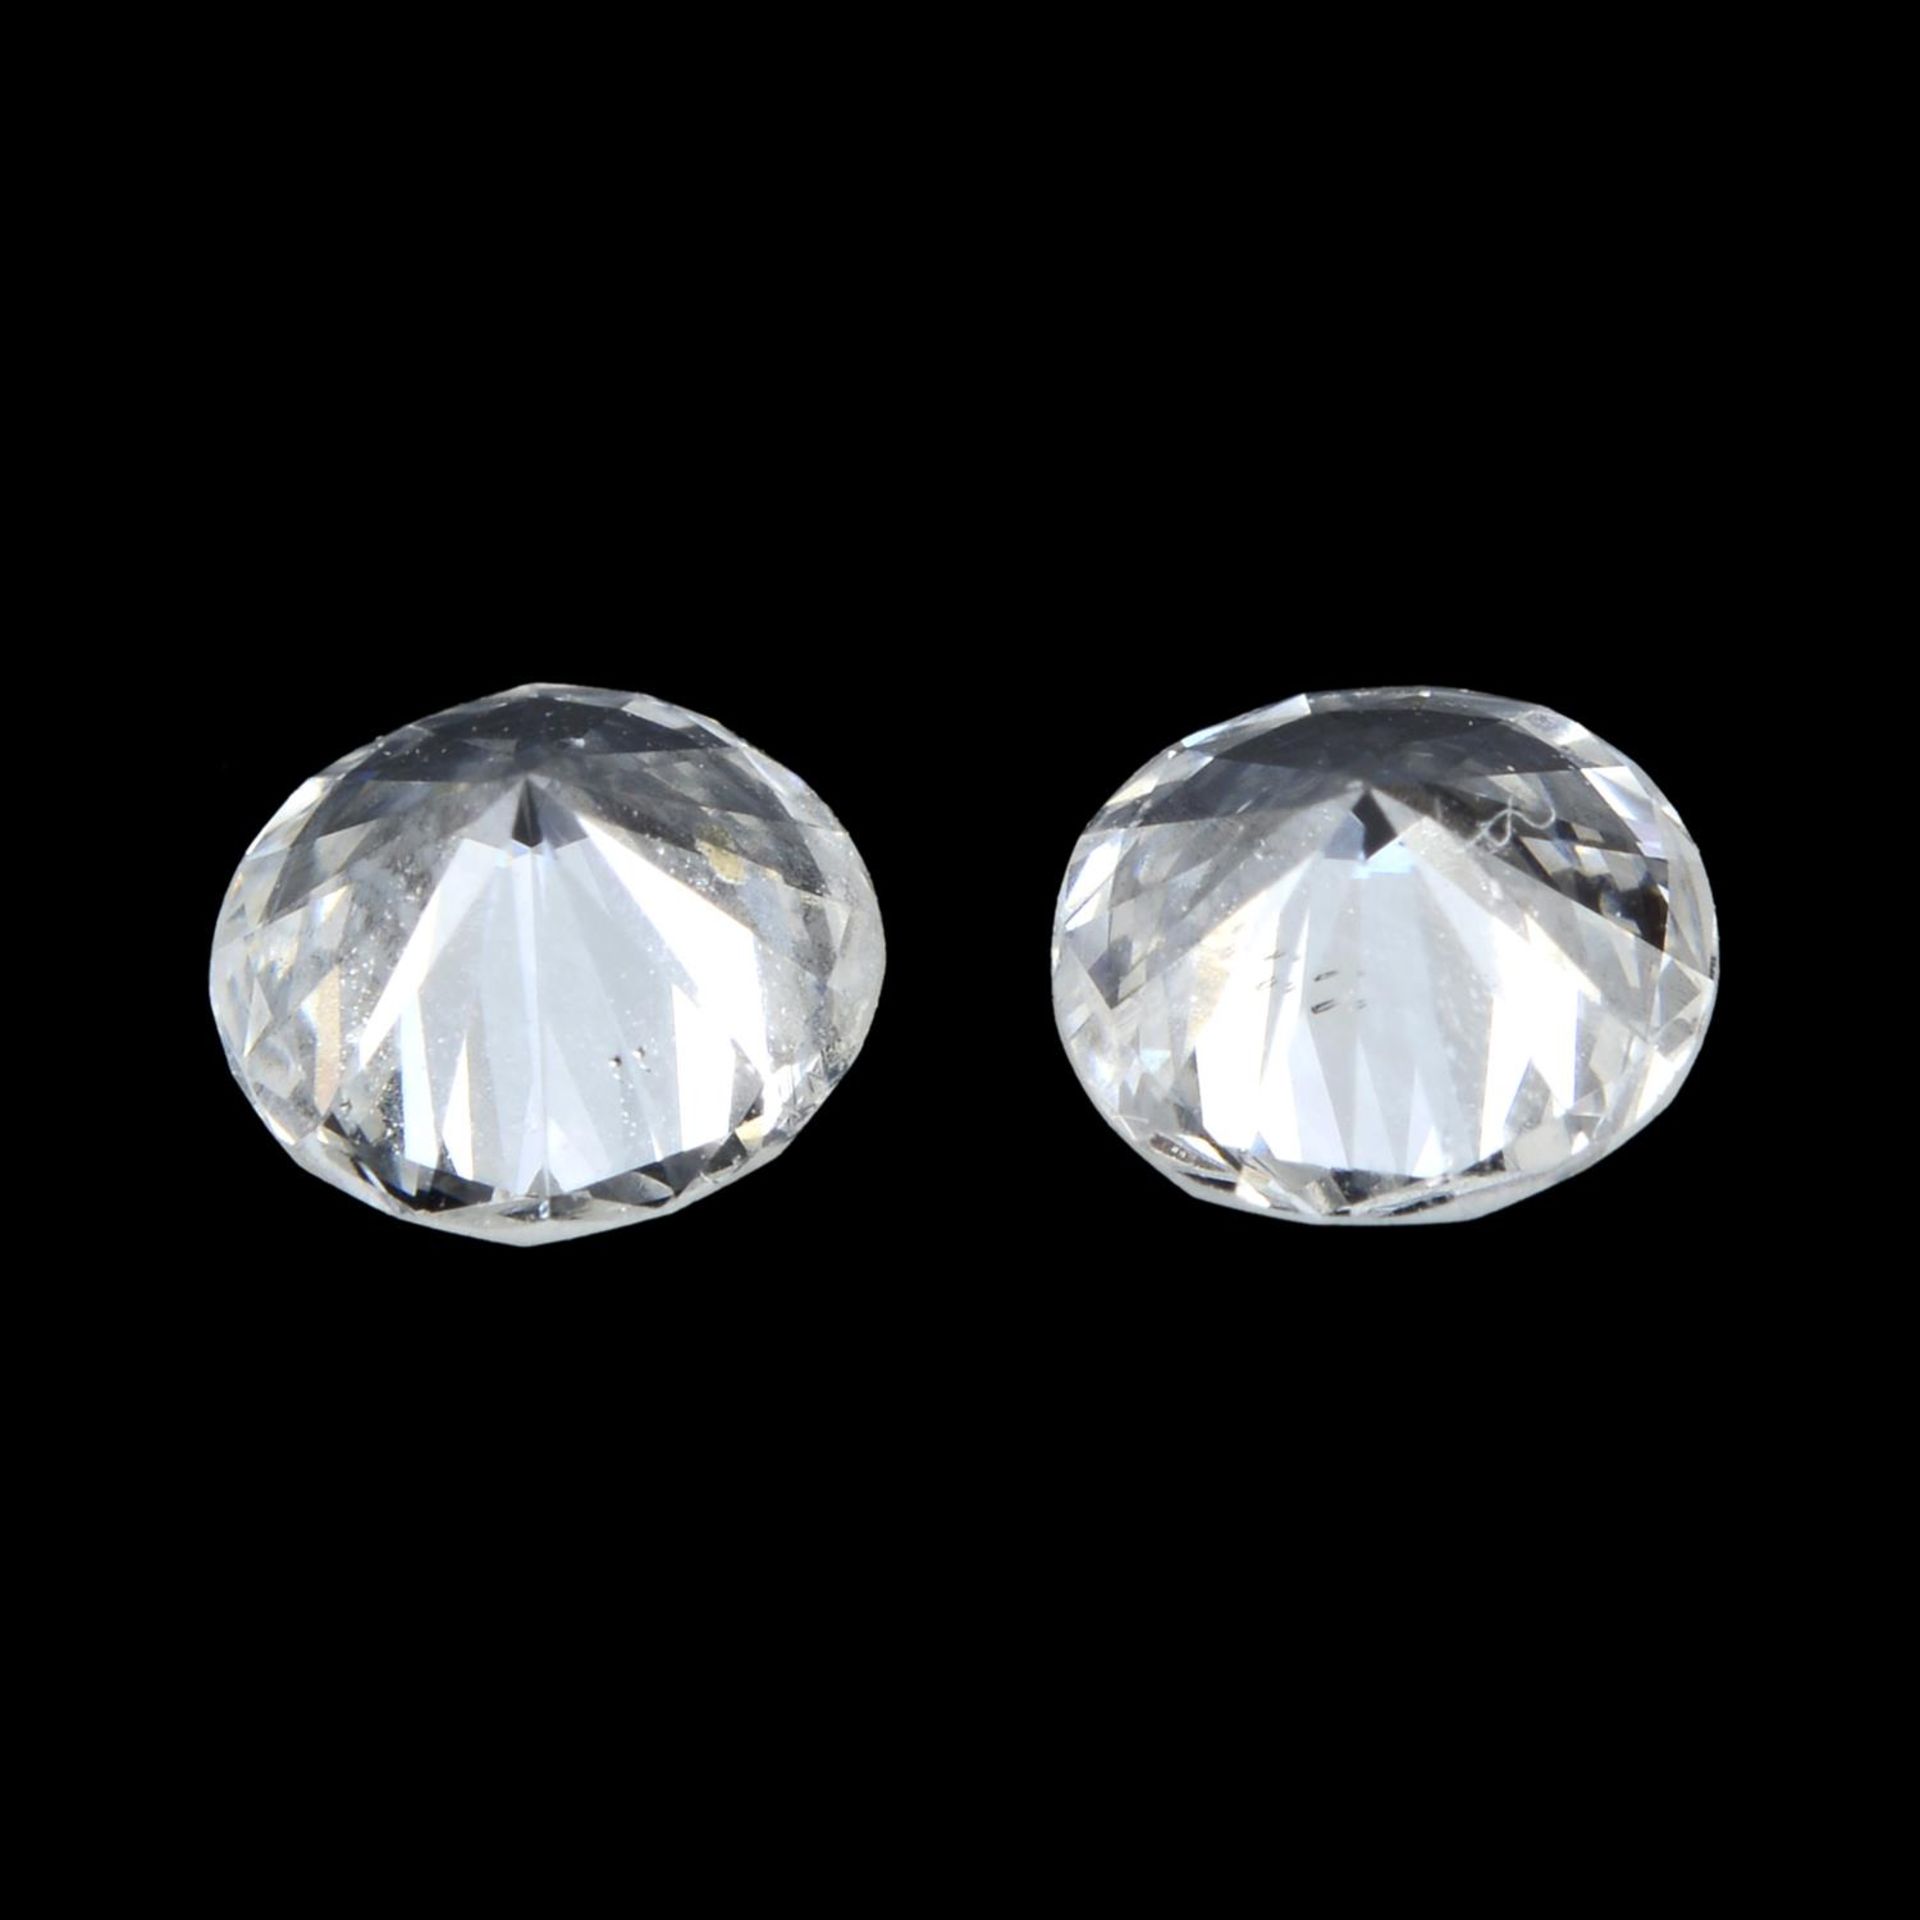 Pair of brilliant cut diamonds weighing 0.51ct - Image 2 of 2